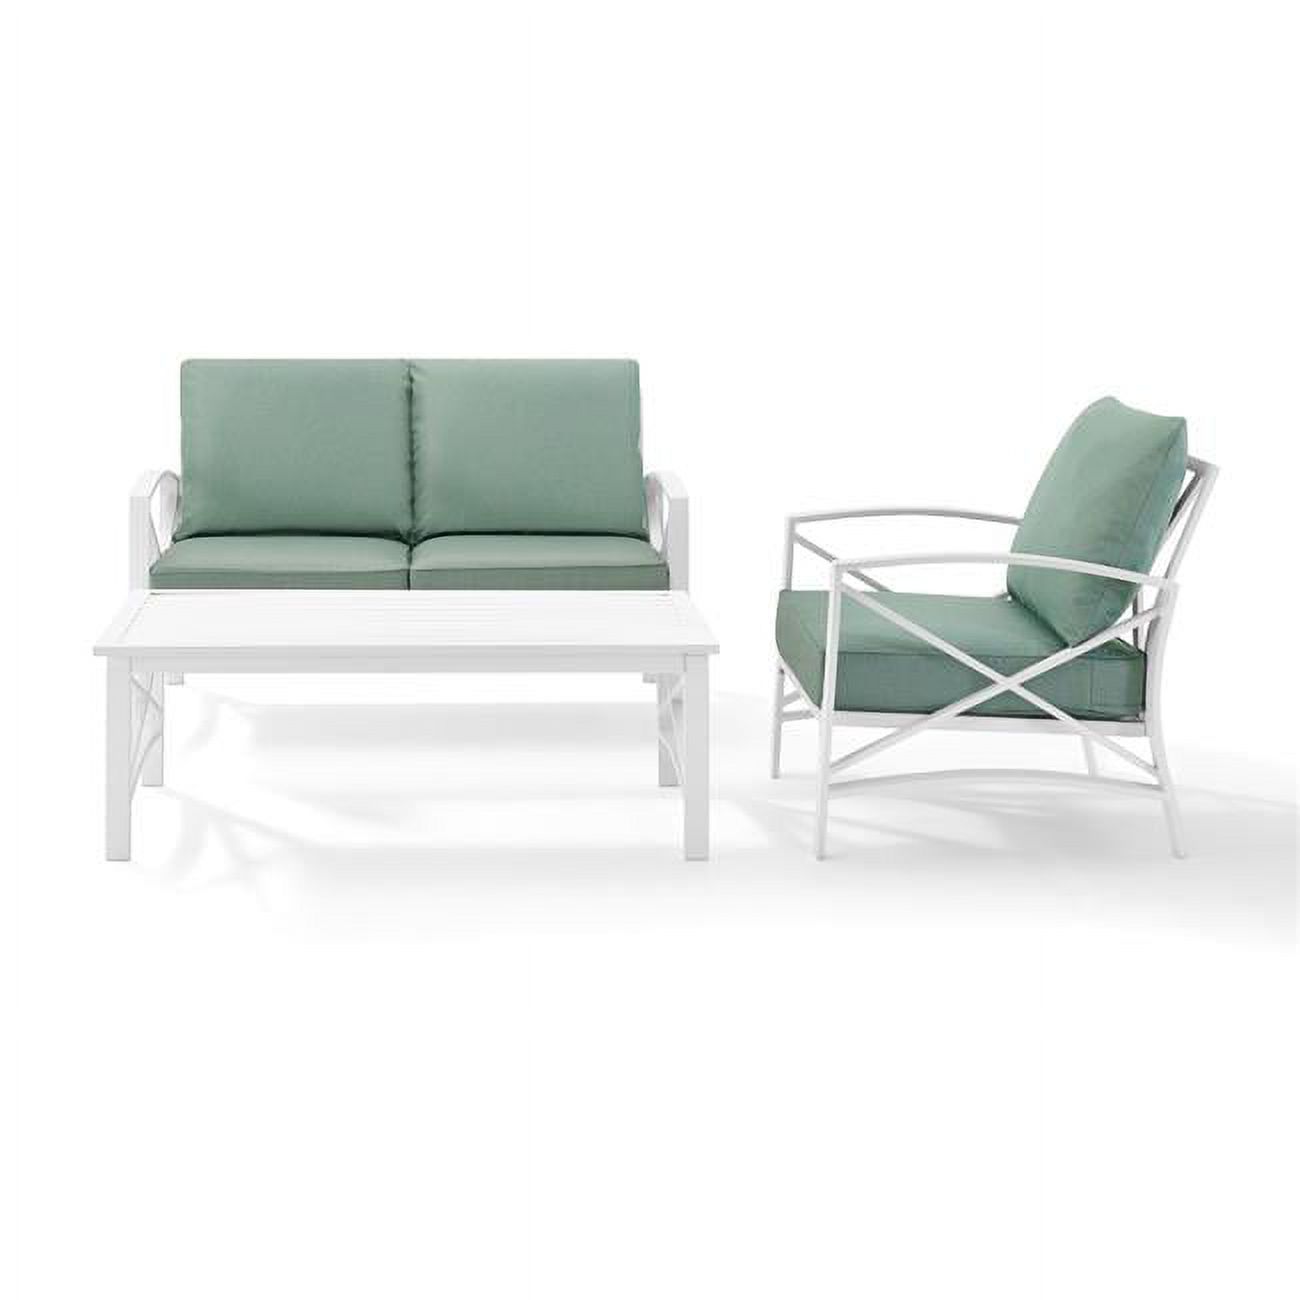 Crosley Kaplan 3 Piece Patio Sofa Set in Mist and White - image 1 of 6